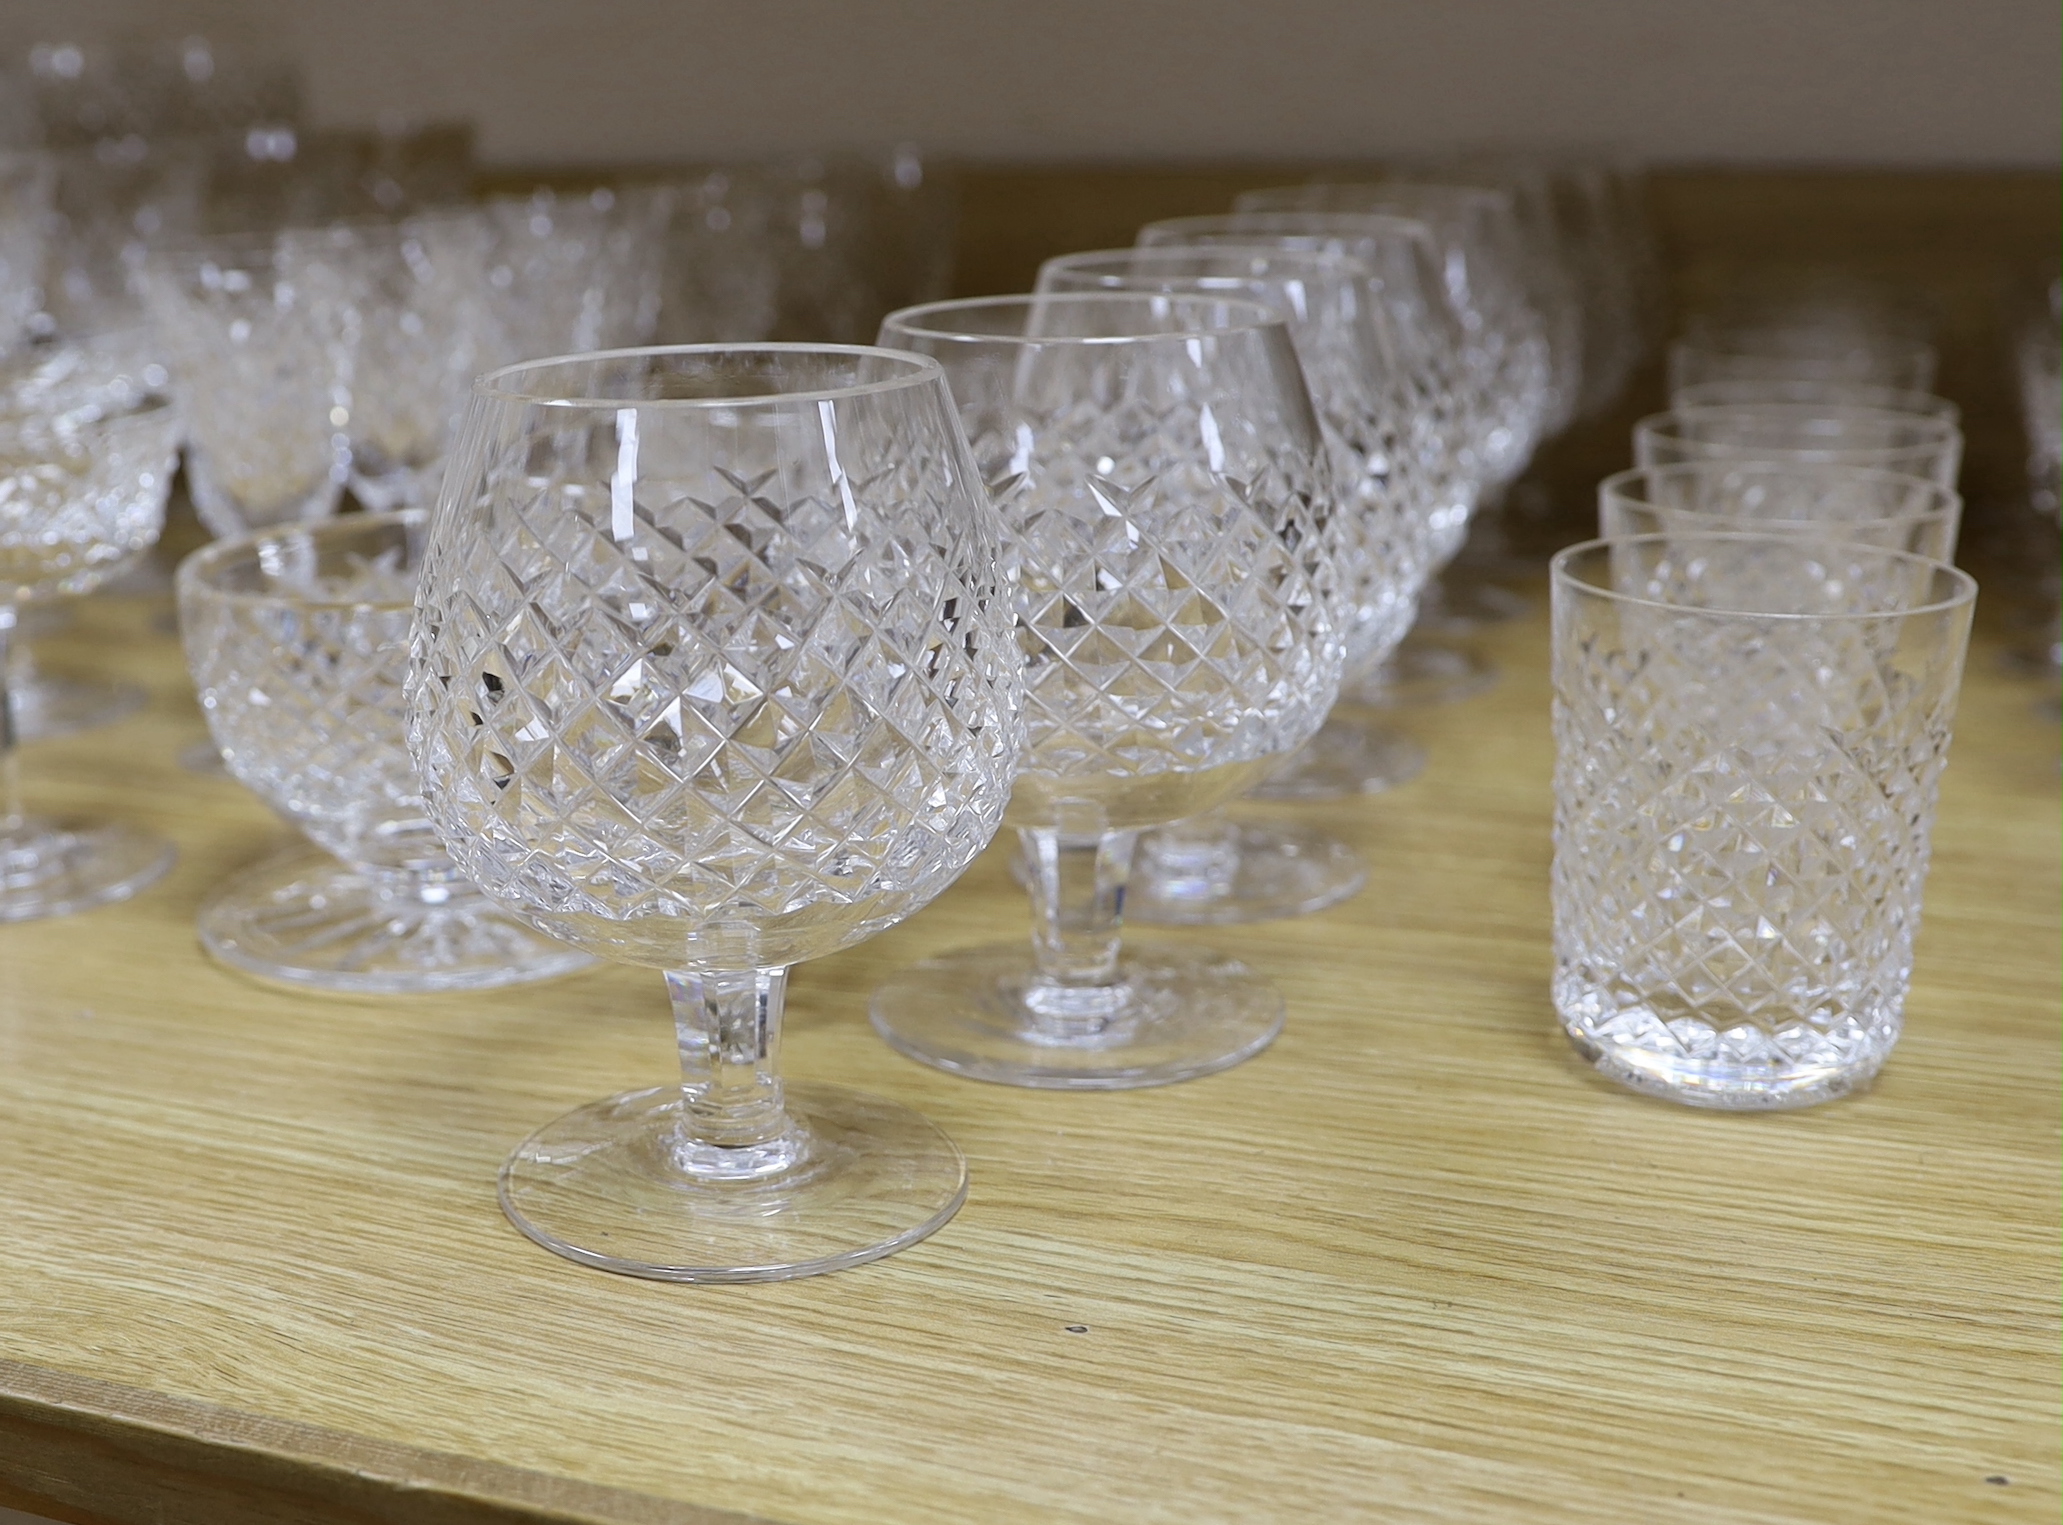 A part suite of Waterford drinking glassware, including champagne glasses, brandy glasses, liquor glasses, wine glasses, etc (61)